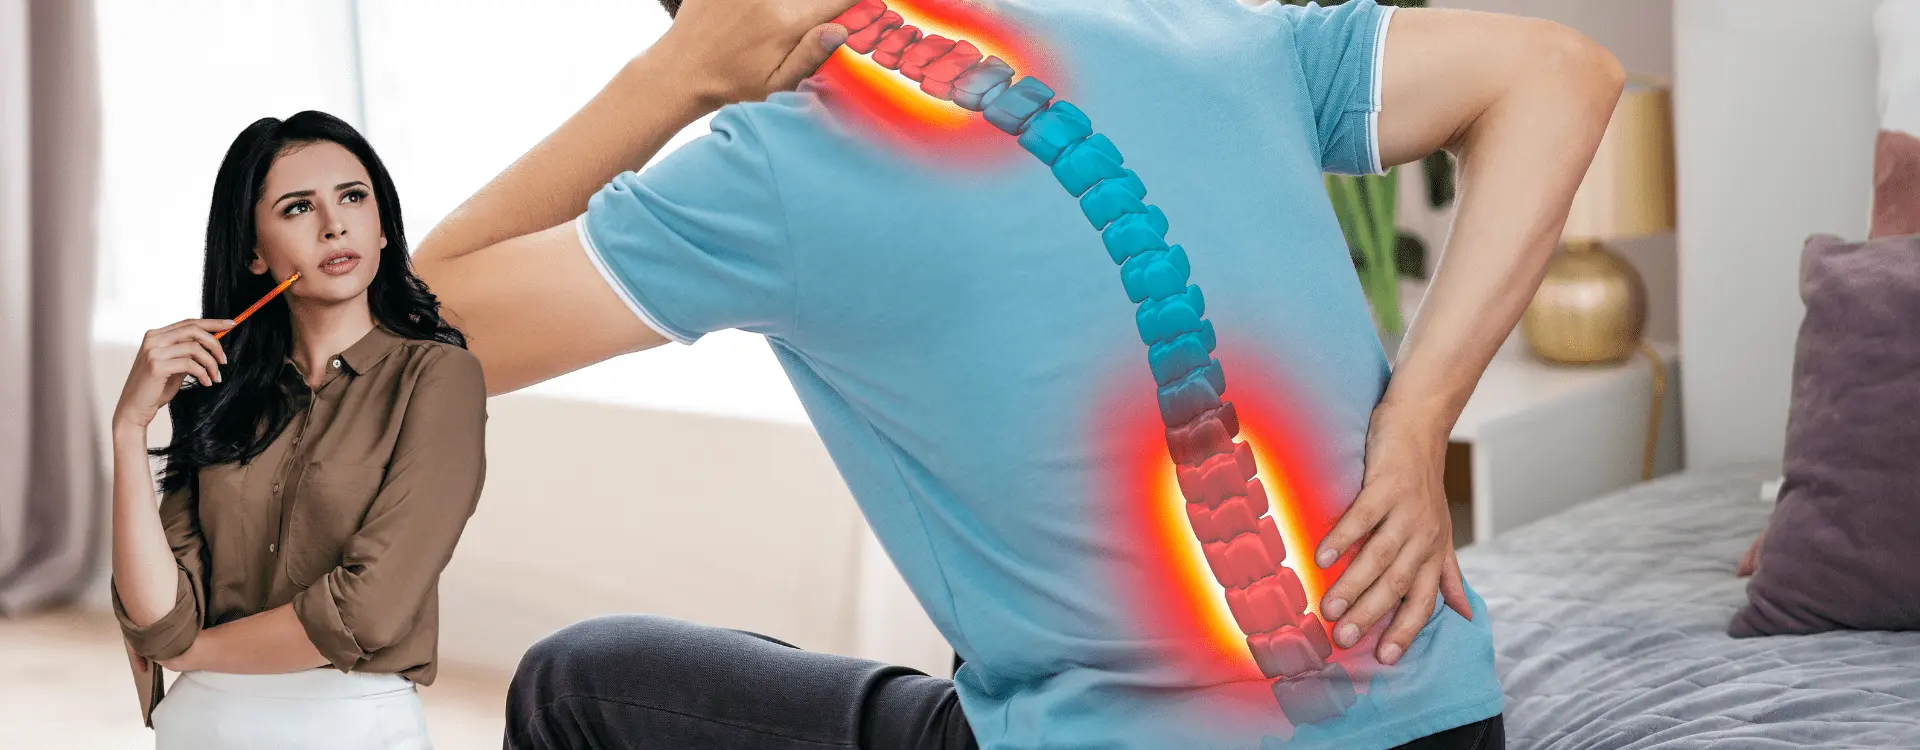 common causes of spinal cord injuries